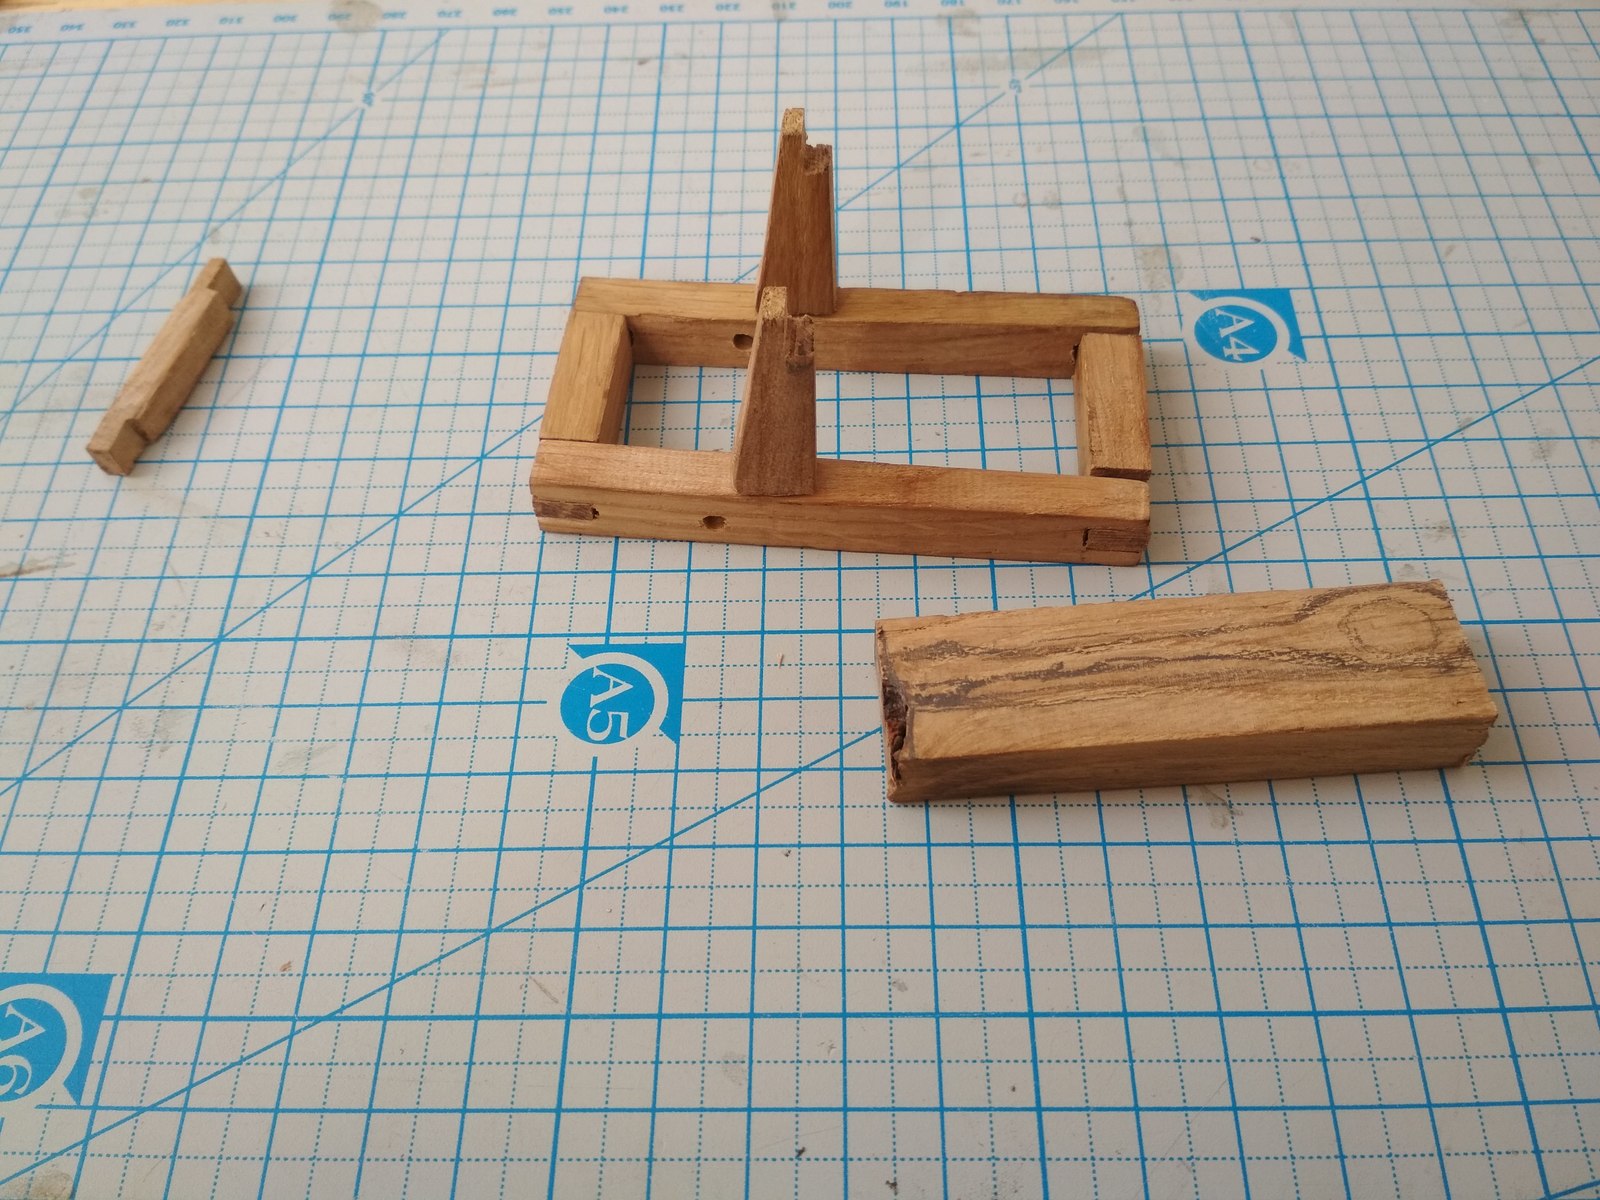 Homemade catapult from cutting boards - My, Catapult, With your own hands, Diy projects, Handmade, Longpost